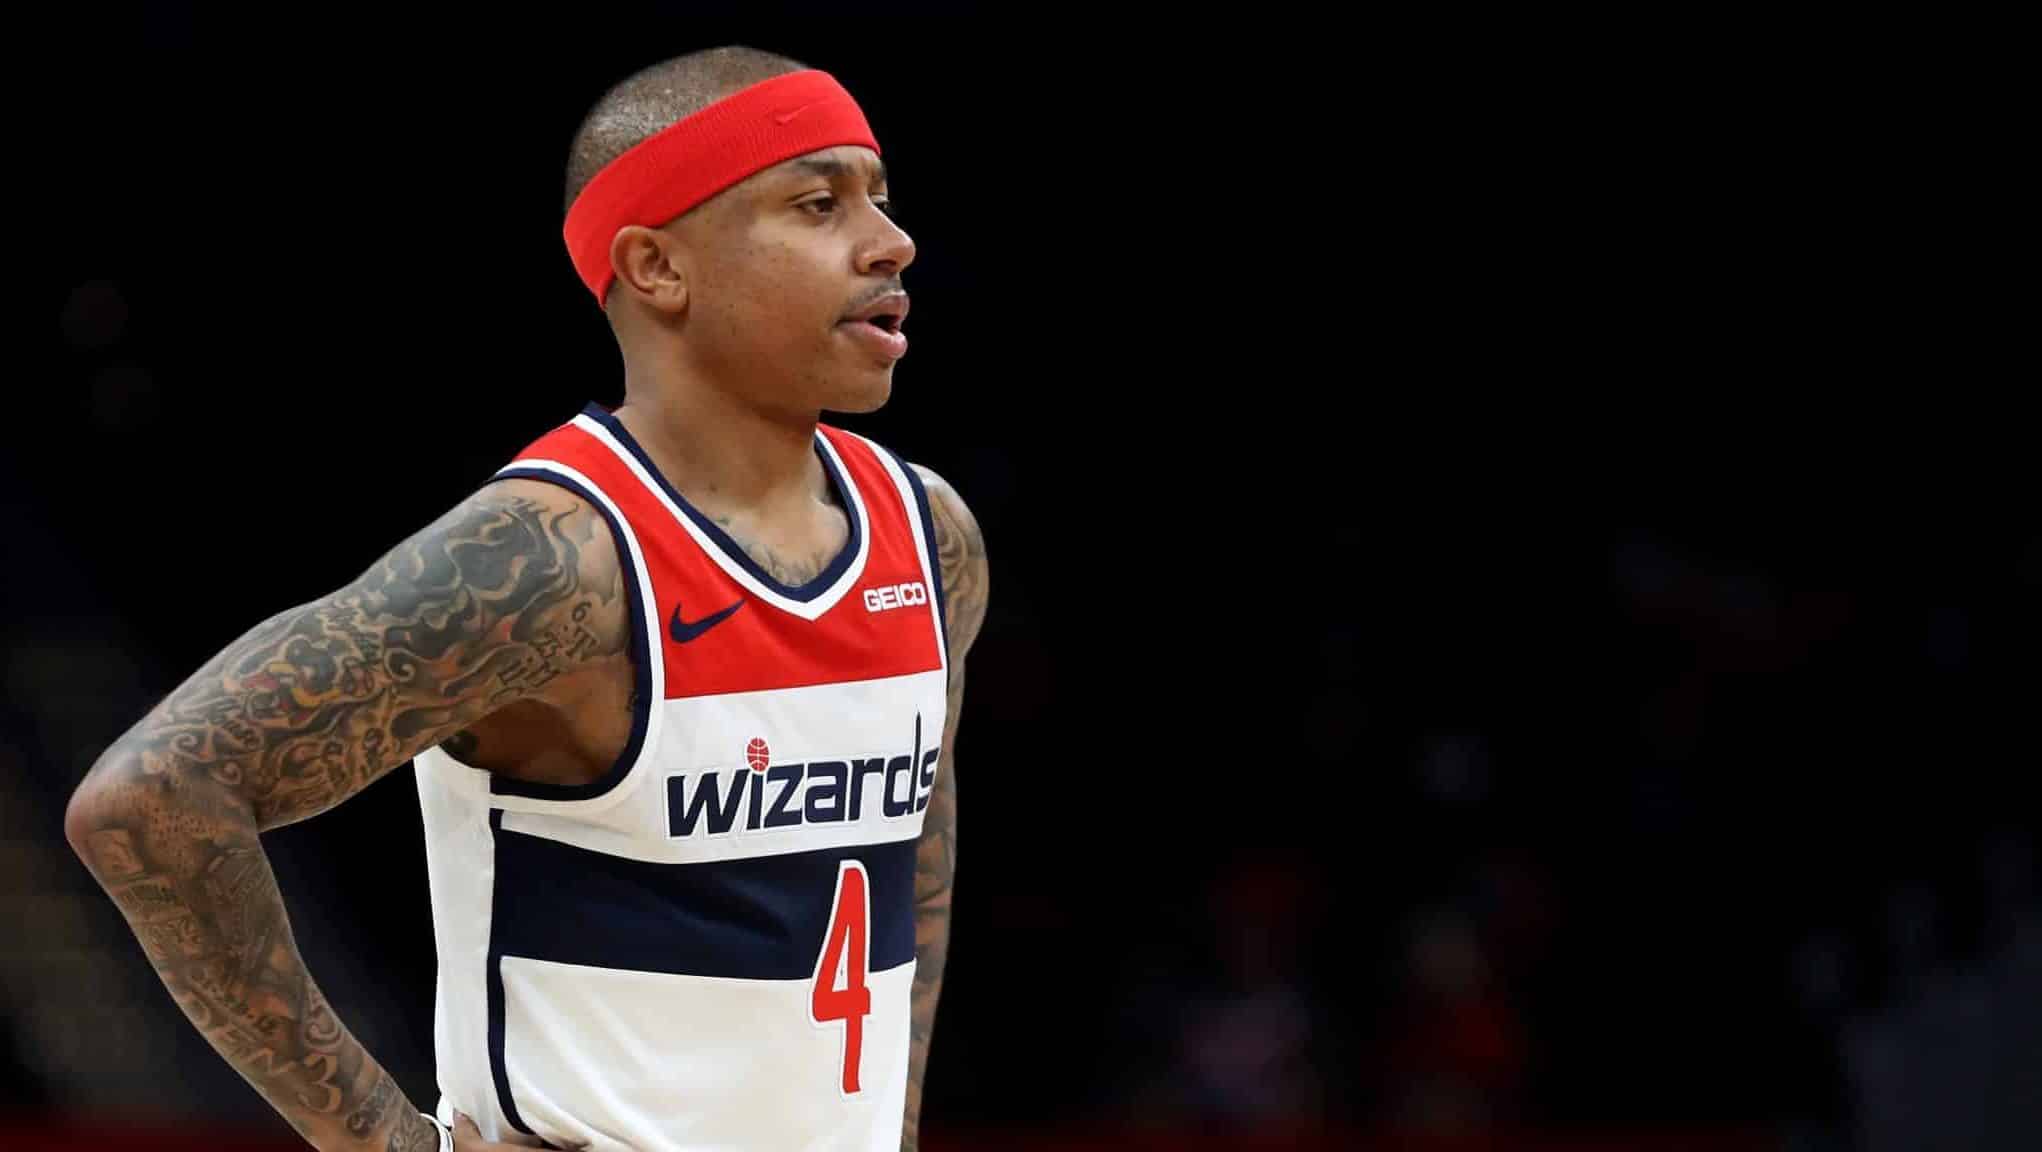 WASHINGTON, DC - NOVEMBER 22: Isaiah Thomas #4 of the Washington Wizards looks on against the Charlotte Hornets in the first half at Capital One Arena on November 22, 2019 in Washington, DC. NOTE TO USER: User expressly acknowledges and agrees that, by downloading and/or using this photograph, user is consenting to the terms and conditions of the Getty Images License Agreement.